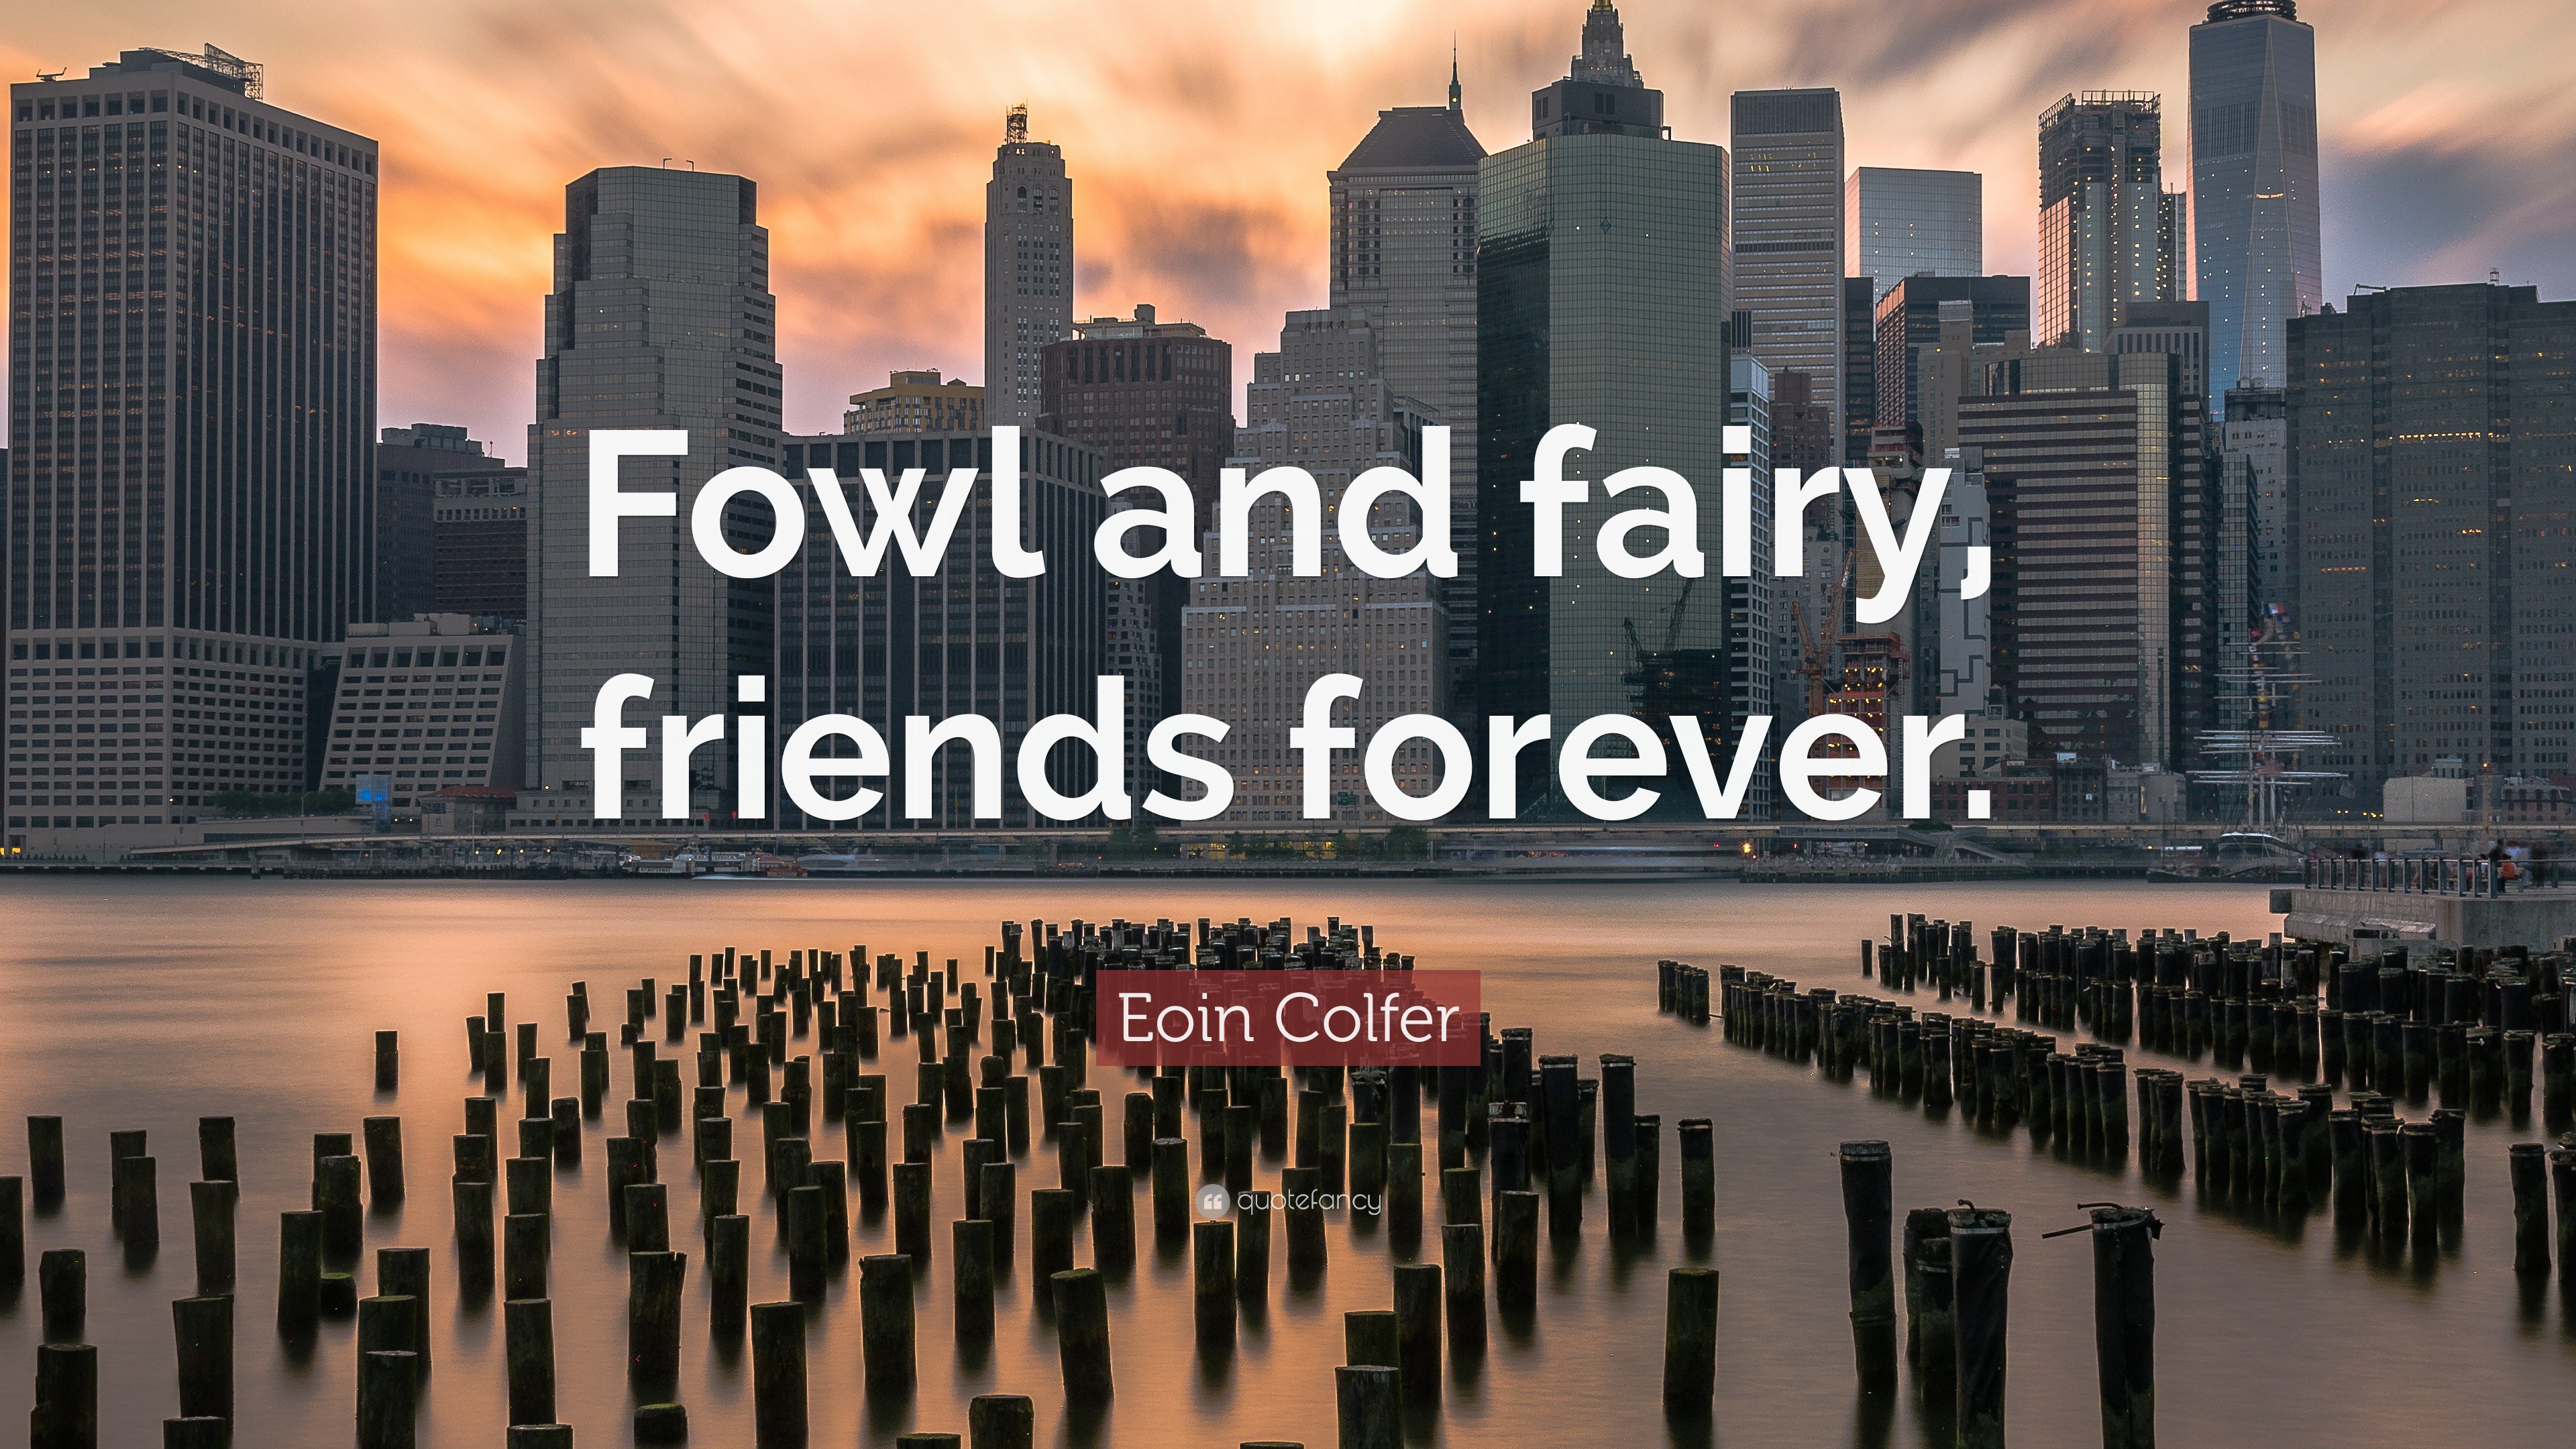 best friends forever quotes wallpapers